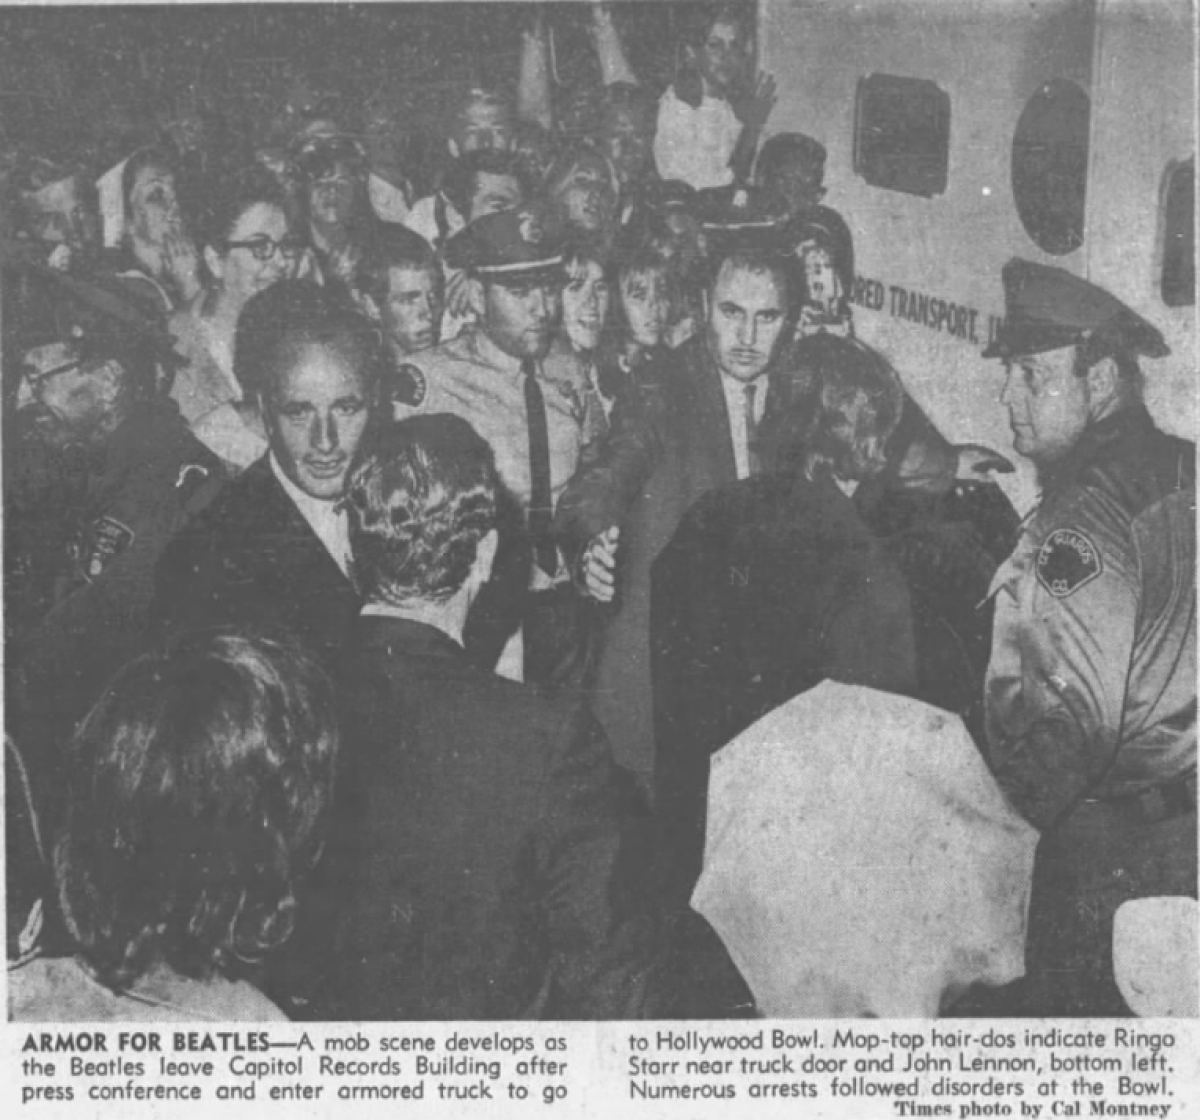 A clip from a newspaper shows a crowd around an armored truck.